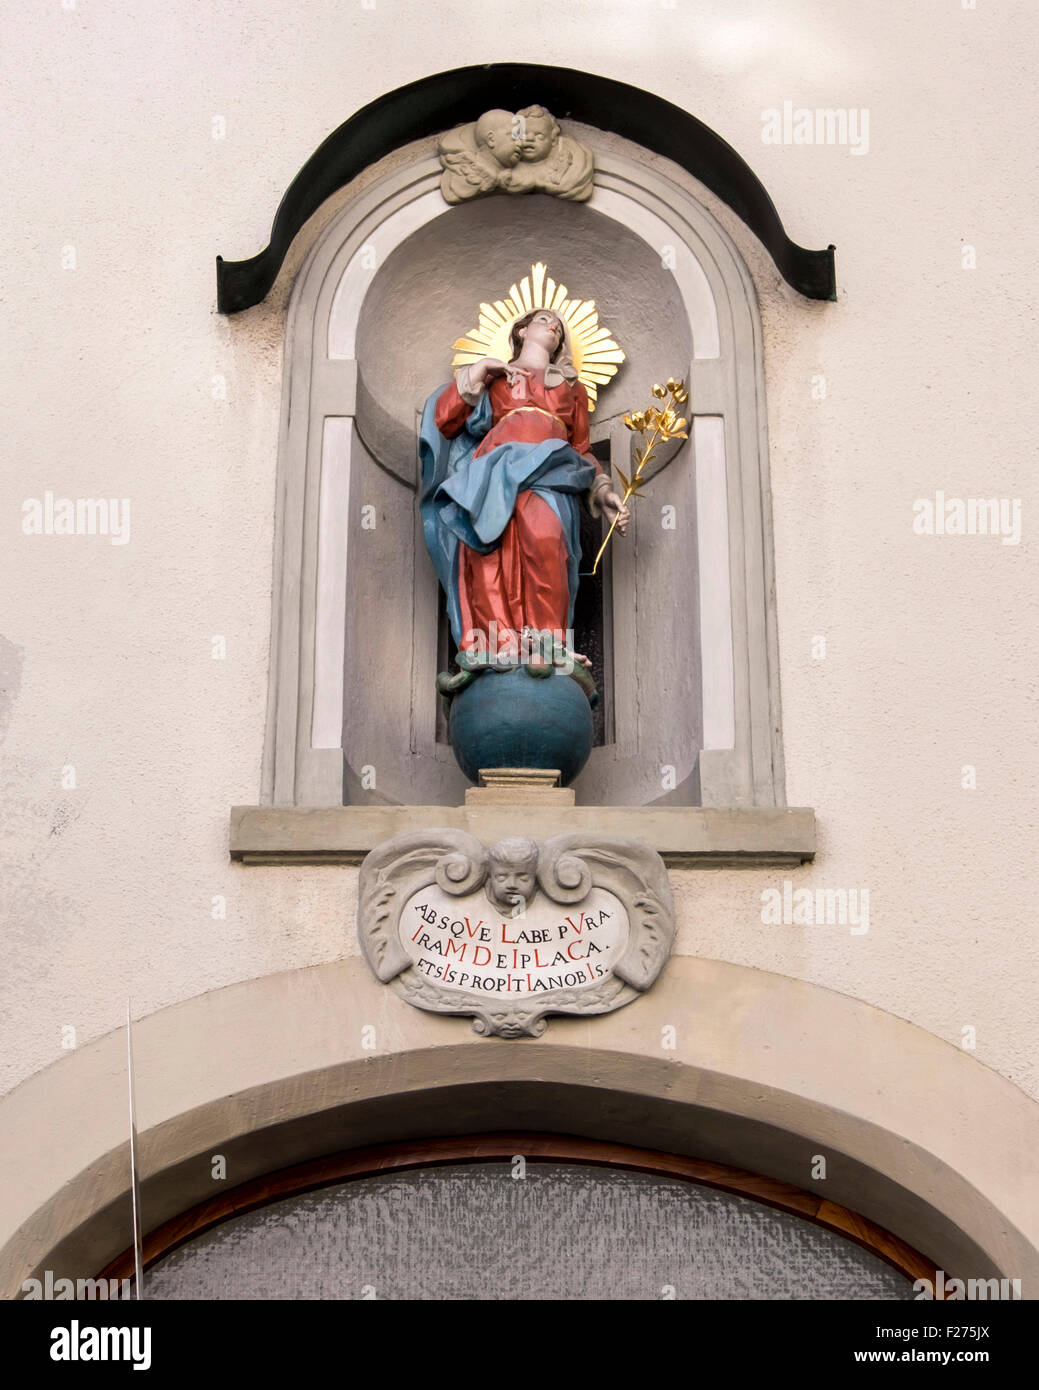 Building detail. Statue of Madonna holding golden lily in alcove. Füssen Town, Ostallgaü, Bavaria, Germany Stock Photo